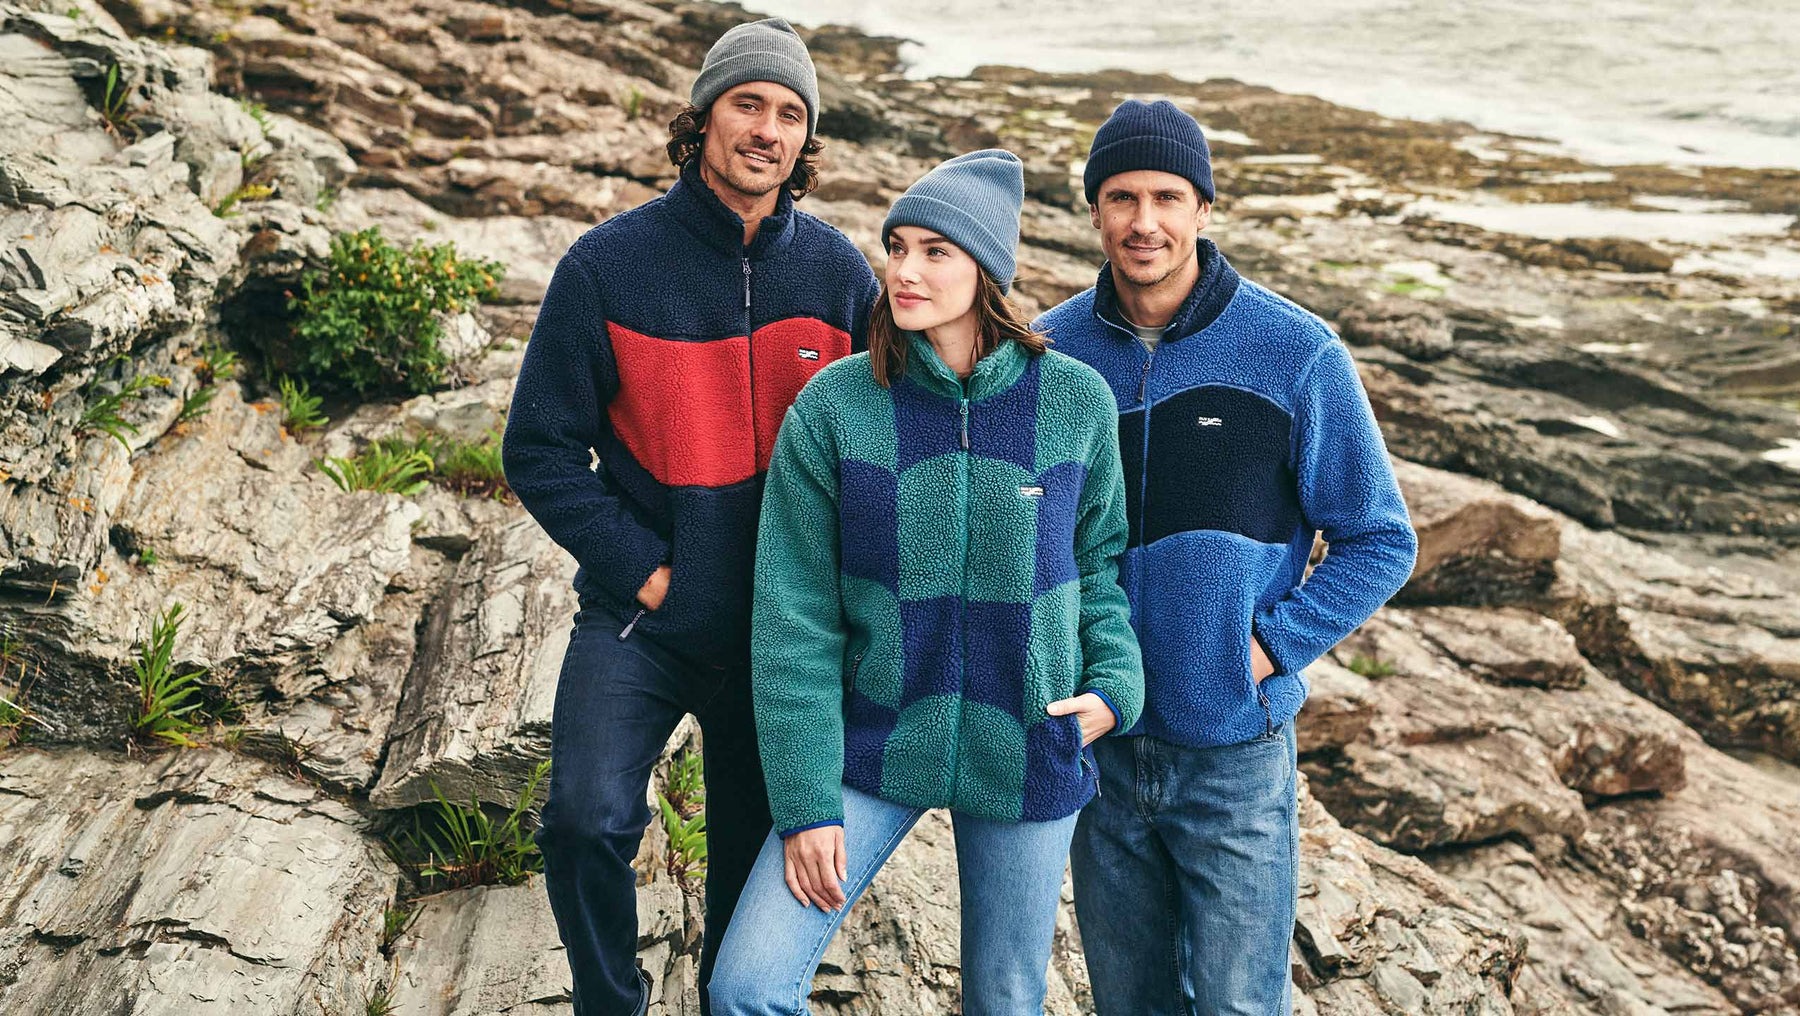 two men and 1 woman wearing fair harbor bayshore fleece jackets in 3 different colorways